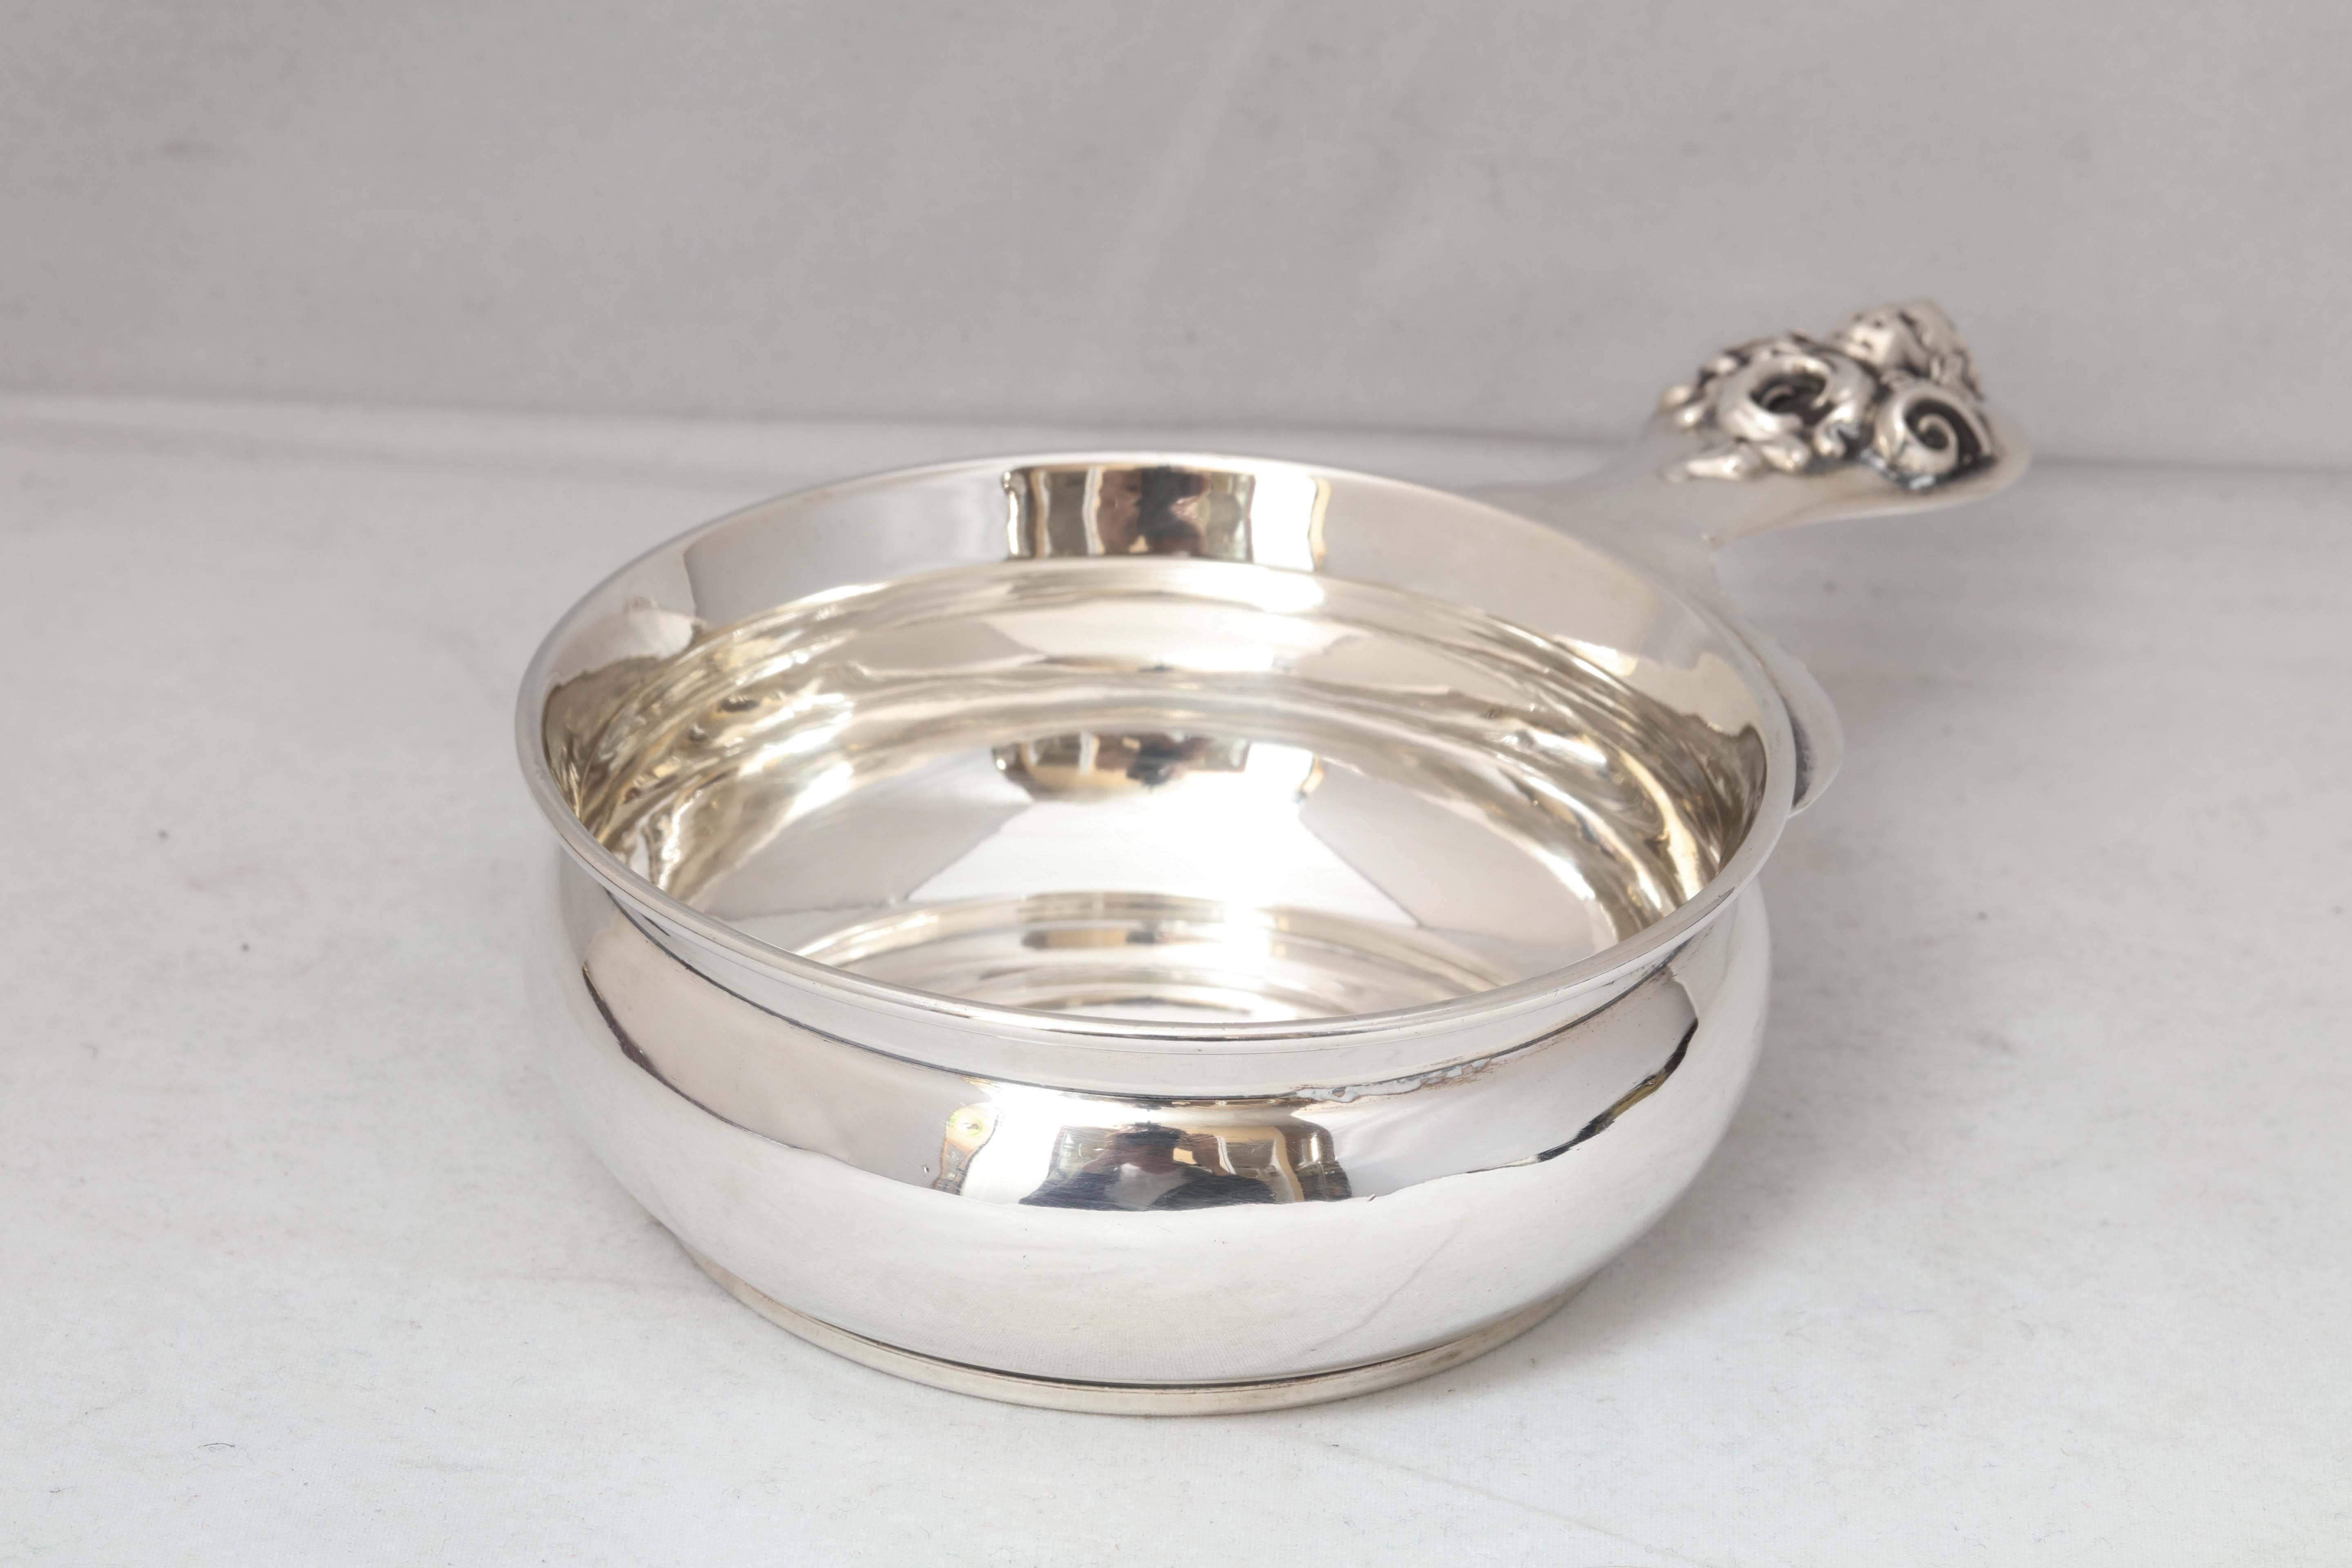 Rare, Art Nouveau, sterling silver porringer. The Mauser Manufacturing Company, New York, circa 1900. Lovely 